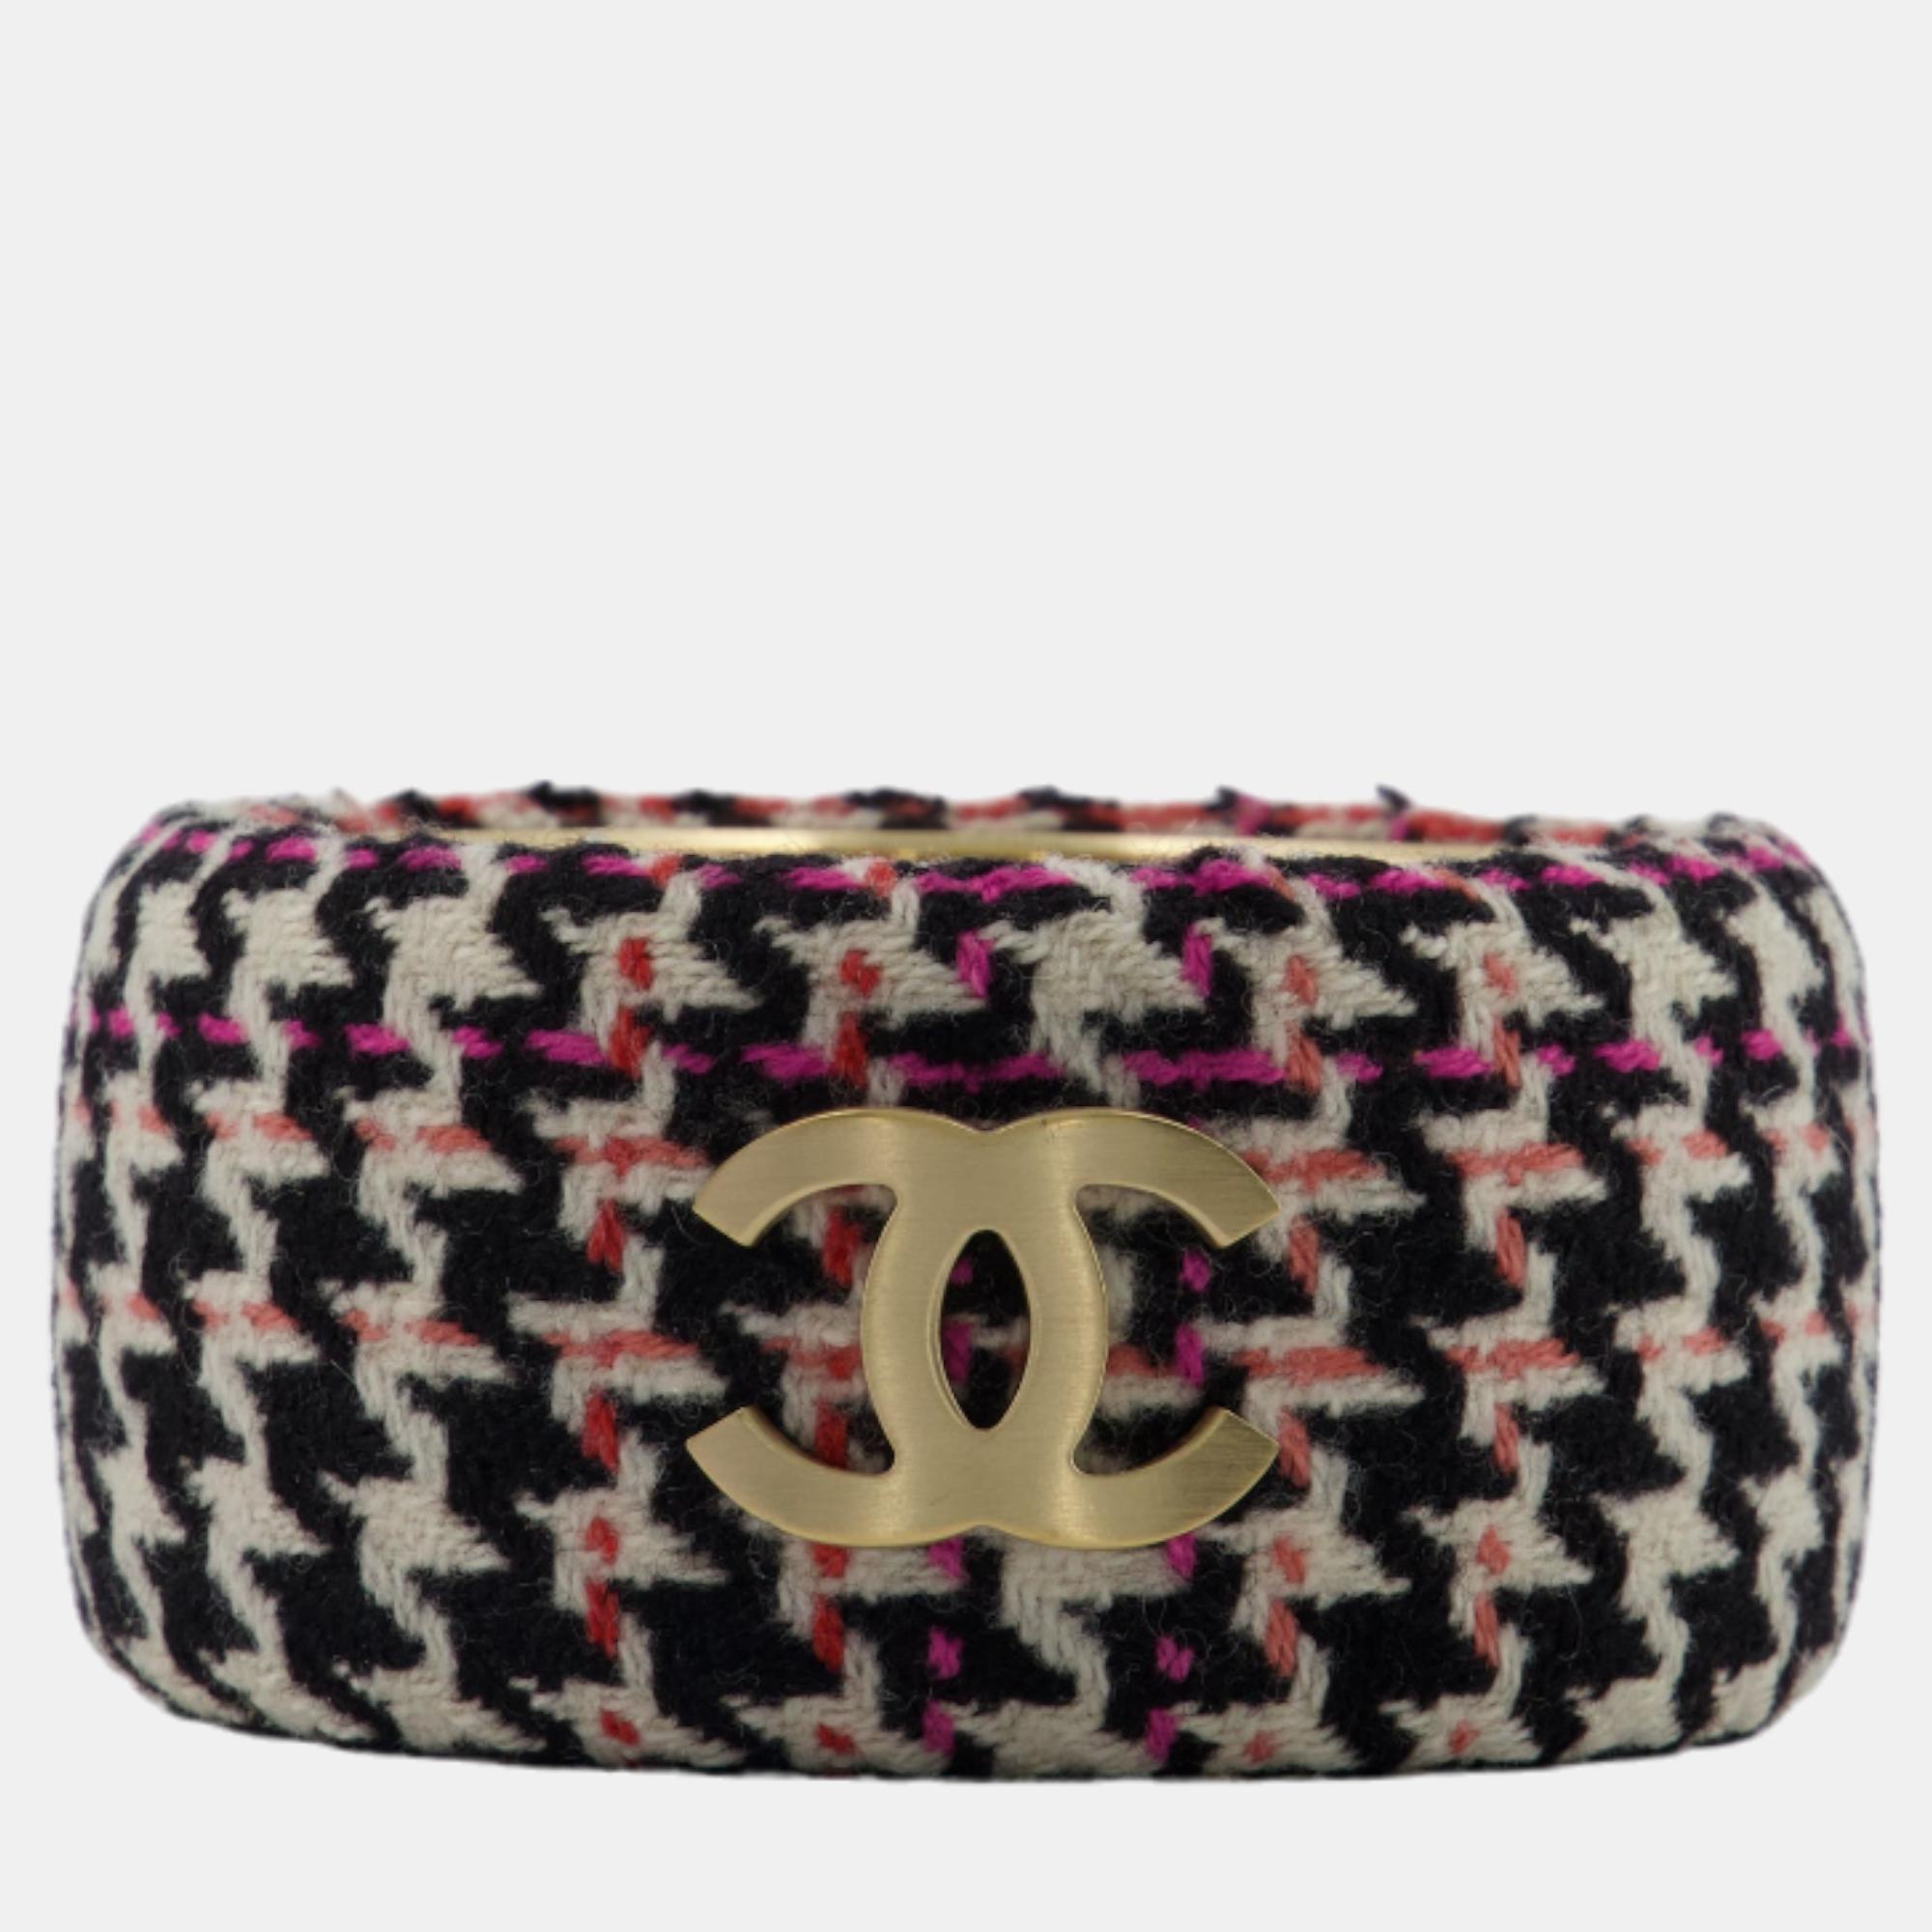 Chanel Tweed Bangle With Champagne Gold Hardware With CC Logos